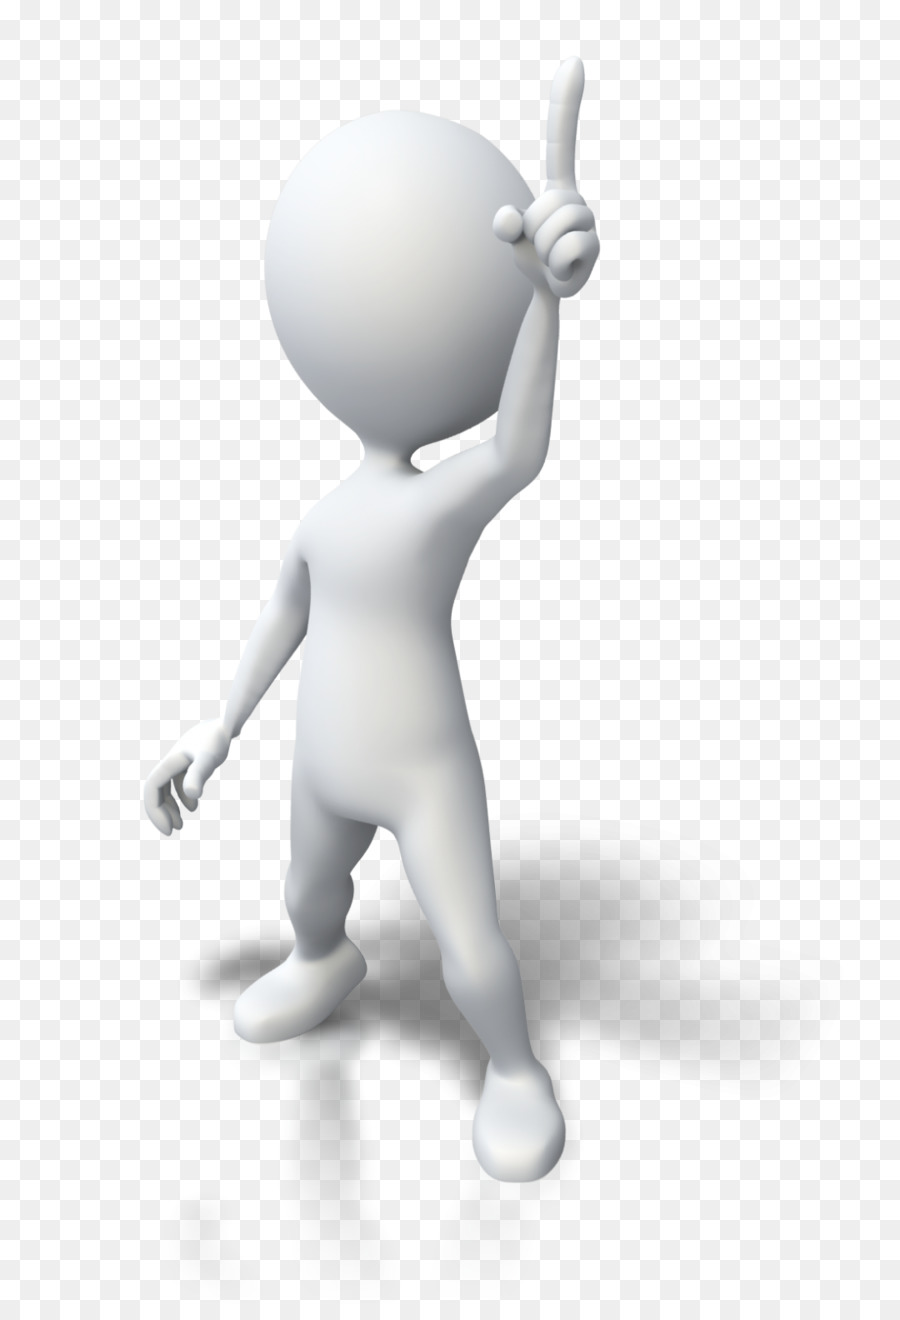 Stick figure Animation Drawing Clip art - thinking man png download